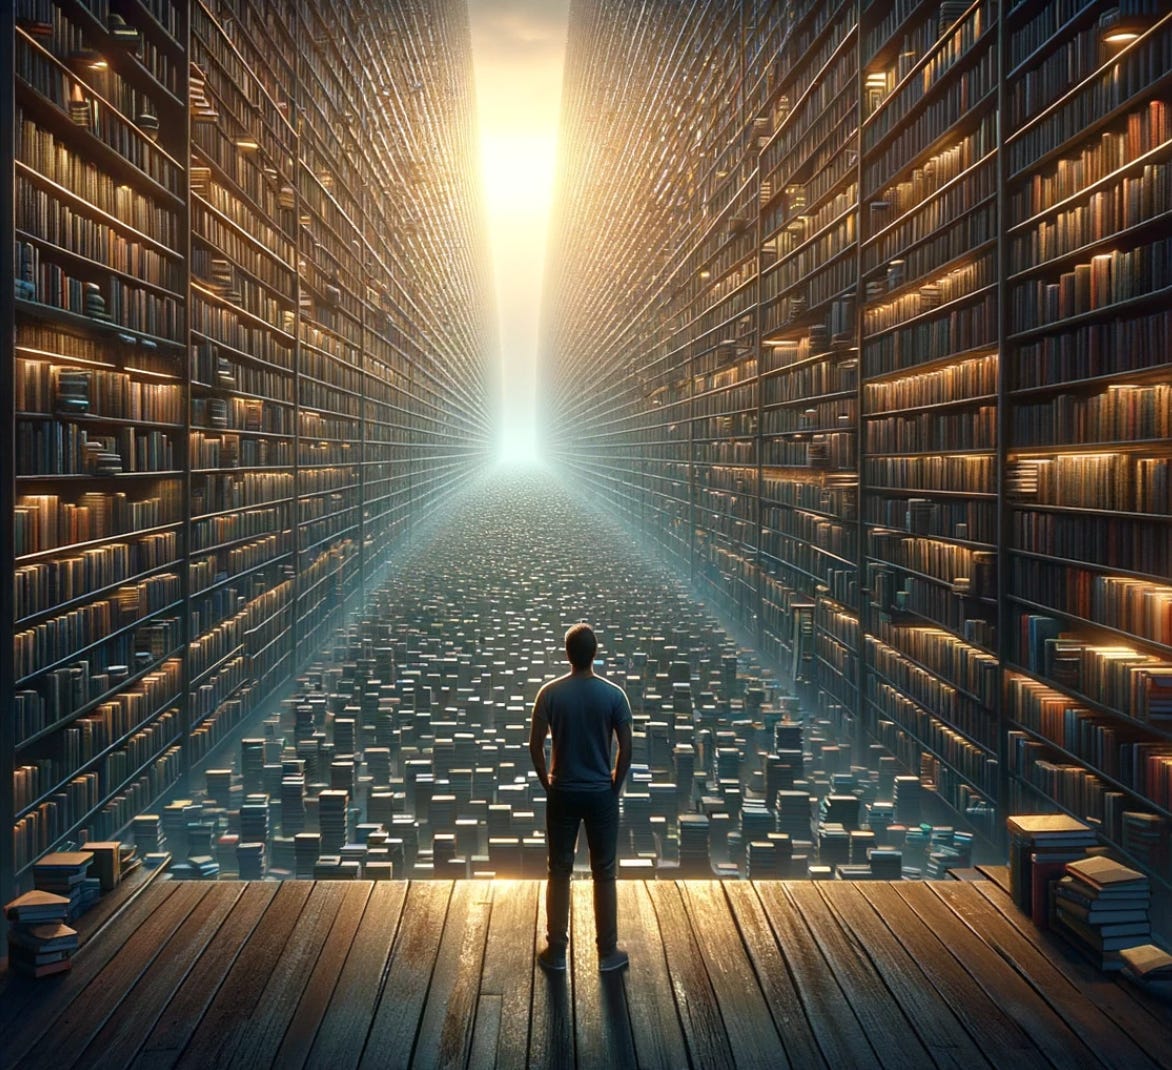 A vast, dimly lit library with endless rows of bookshelves stretching into the horizon, symbolizing an immense expanse of knowledge. In the foreground, a figure with indistinct gender and race, dressed in casual attire, stands gazing at the shelves, appearing overwhelmed by the enormity of the library. The ambient lighting casts soft shadows, creating a serene yet slightly daunting atmosphere, emphasizing the concept of the overwhelming nature of trying to encompass all knowledge.